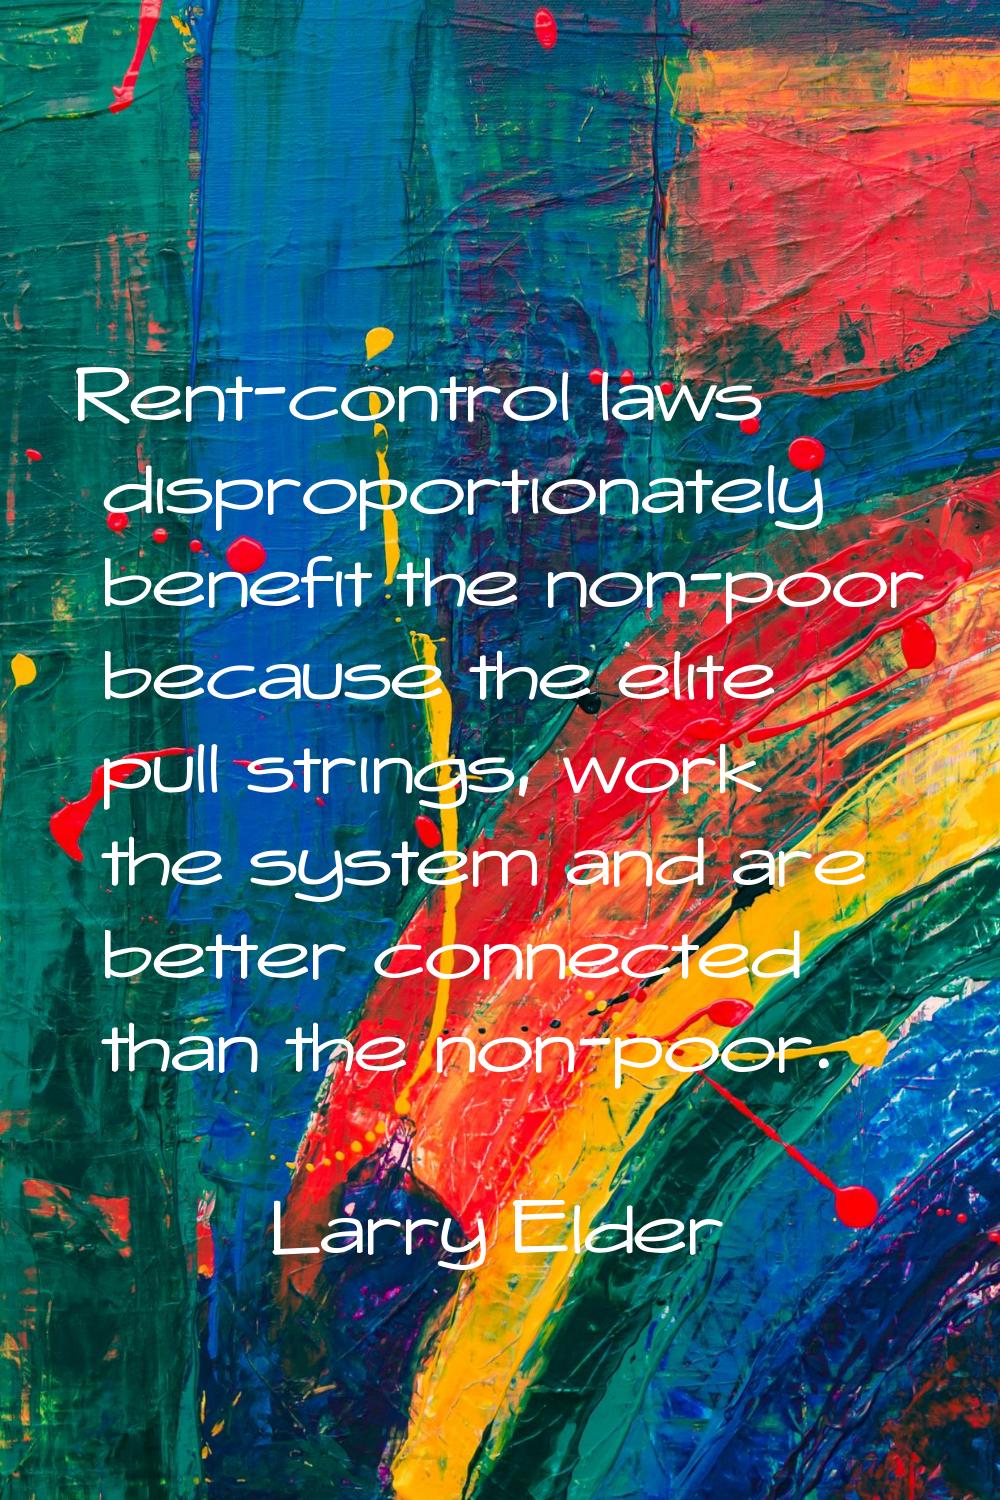 Rent-control laws disproportionately benefit the non-poor because the elite pull strings, work the 